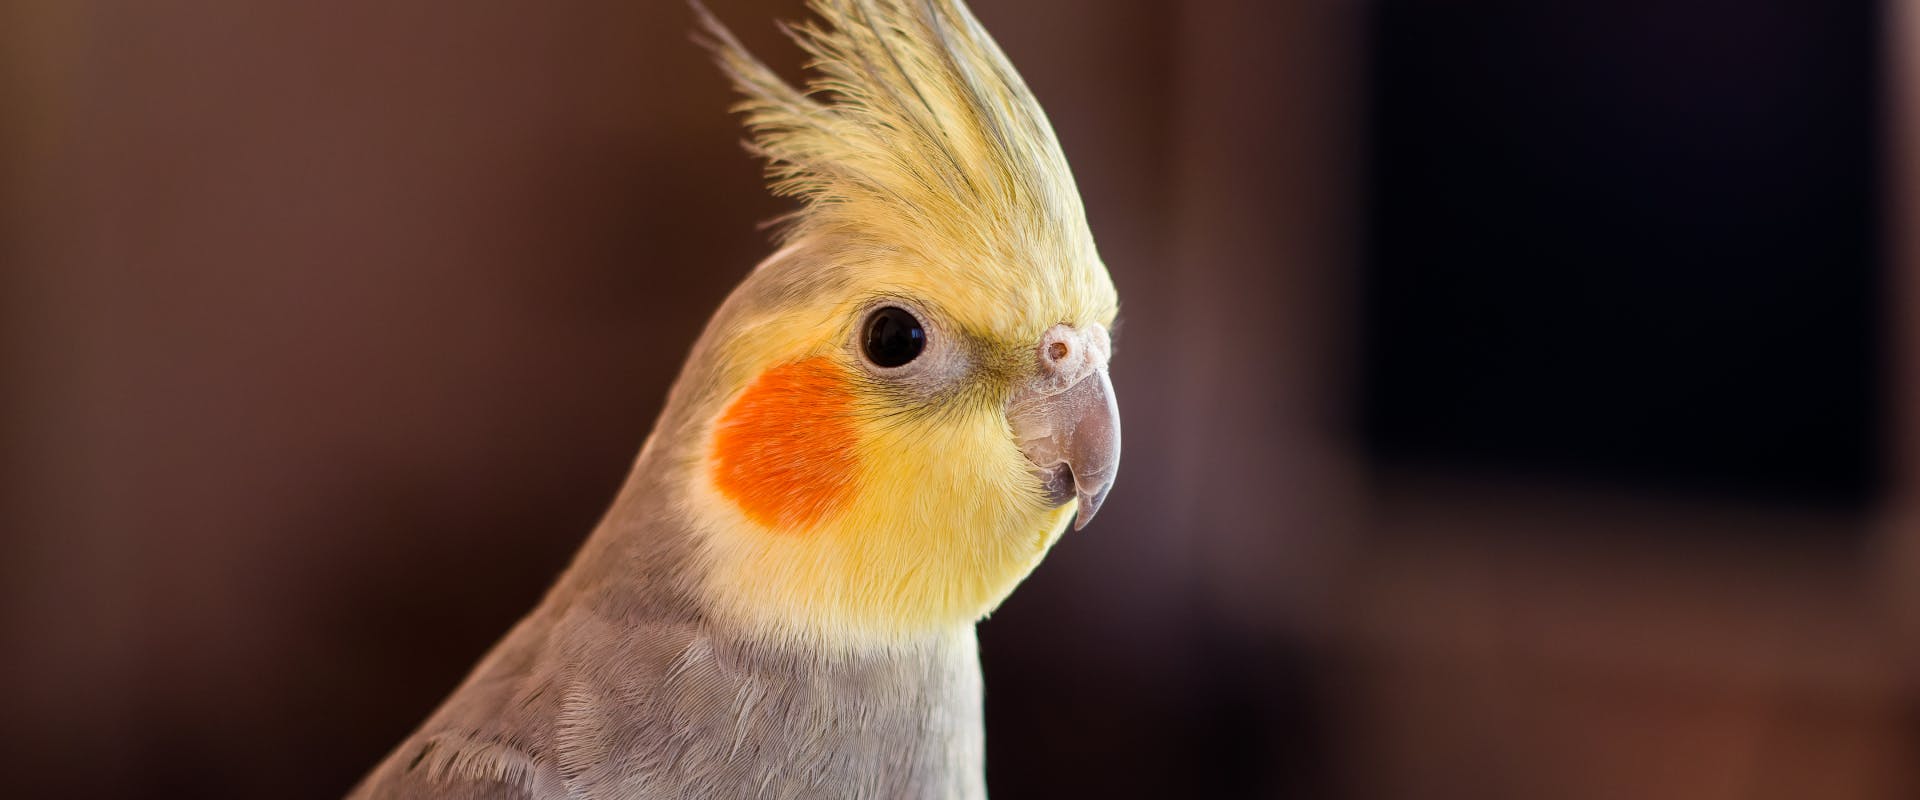 a close up of a cockatiel which is a small exotic bird